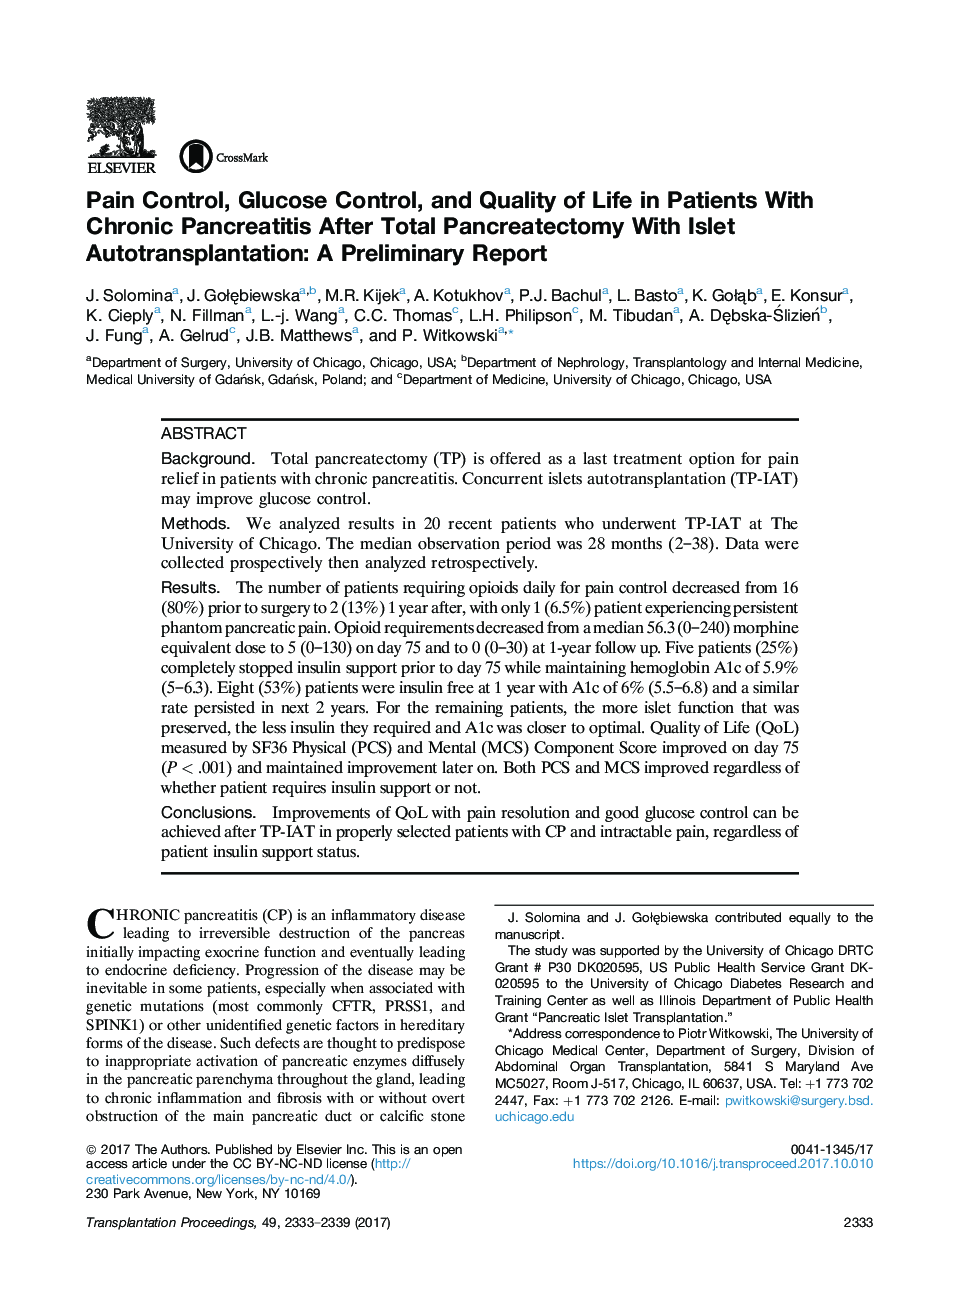 Pain Control, Glucose Control, and Quality of Life in Patients With Chronic Pancreatitis After Total Pancreatectomy With Islet Autotransplantation: A Preliminary Report